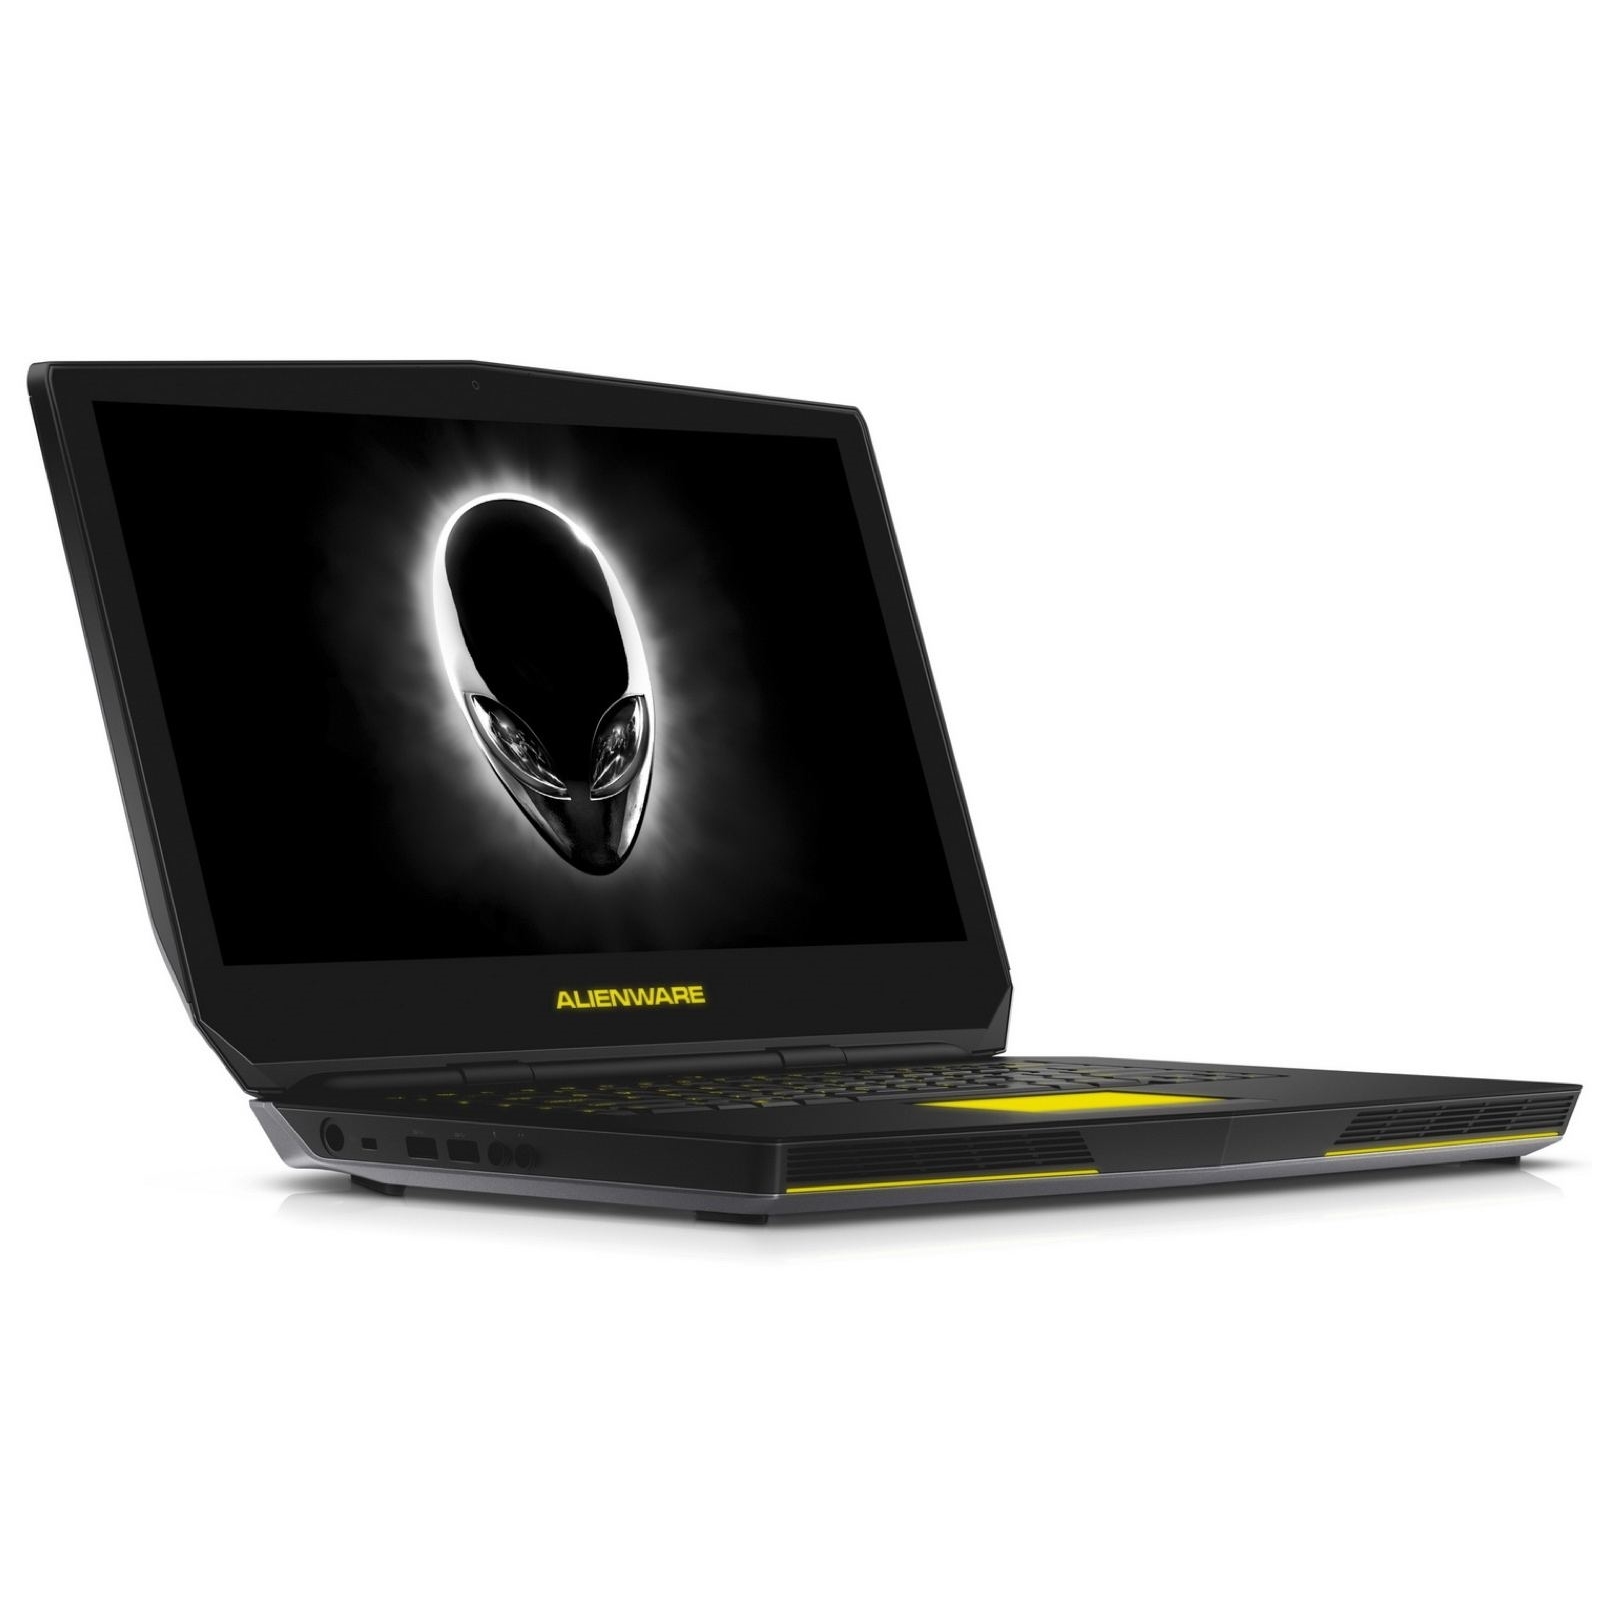 Recertified Dell Alienware 15 R2 15.6-Inch FHD Gaming Laptop ( Intel Core i7-6700HQ 2.6Ghz, 16GB RAM, 500GB HD, NVIDIA GeForce GTX 970M 3GB, Windows 10 Home ) Grade A - image 1 of 8